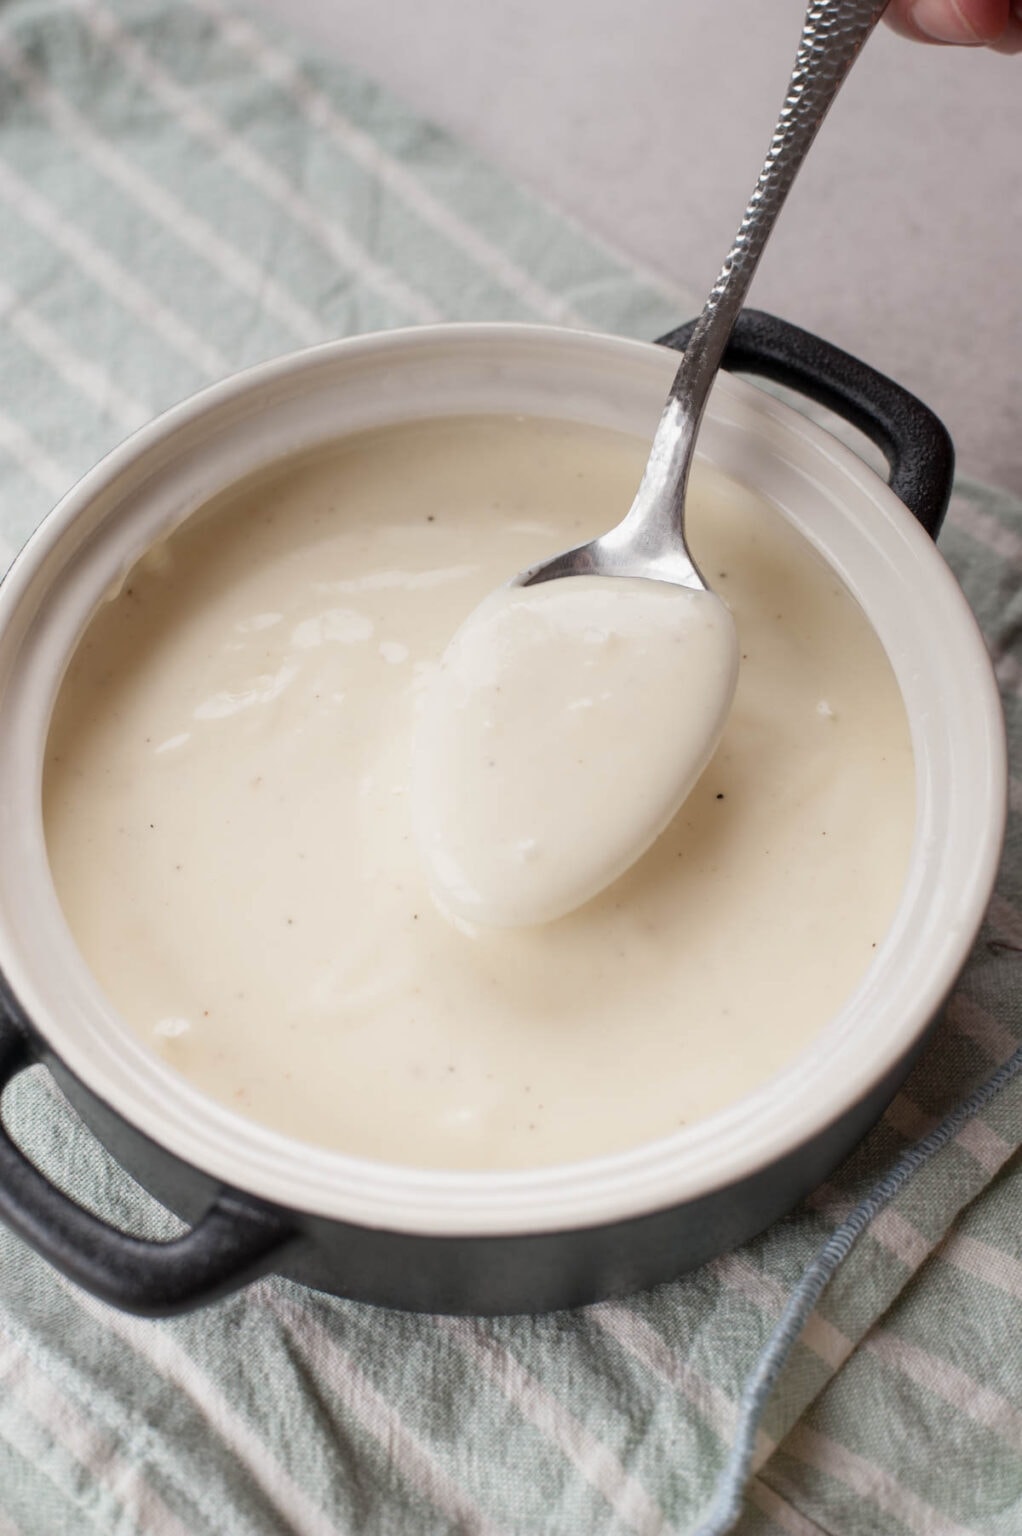 How to make bechamel sauce - an easy and foolproof recipe